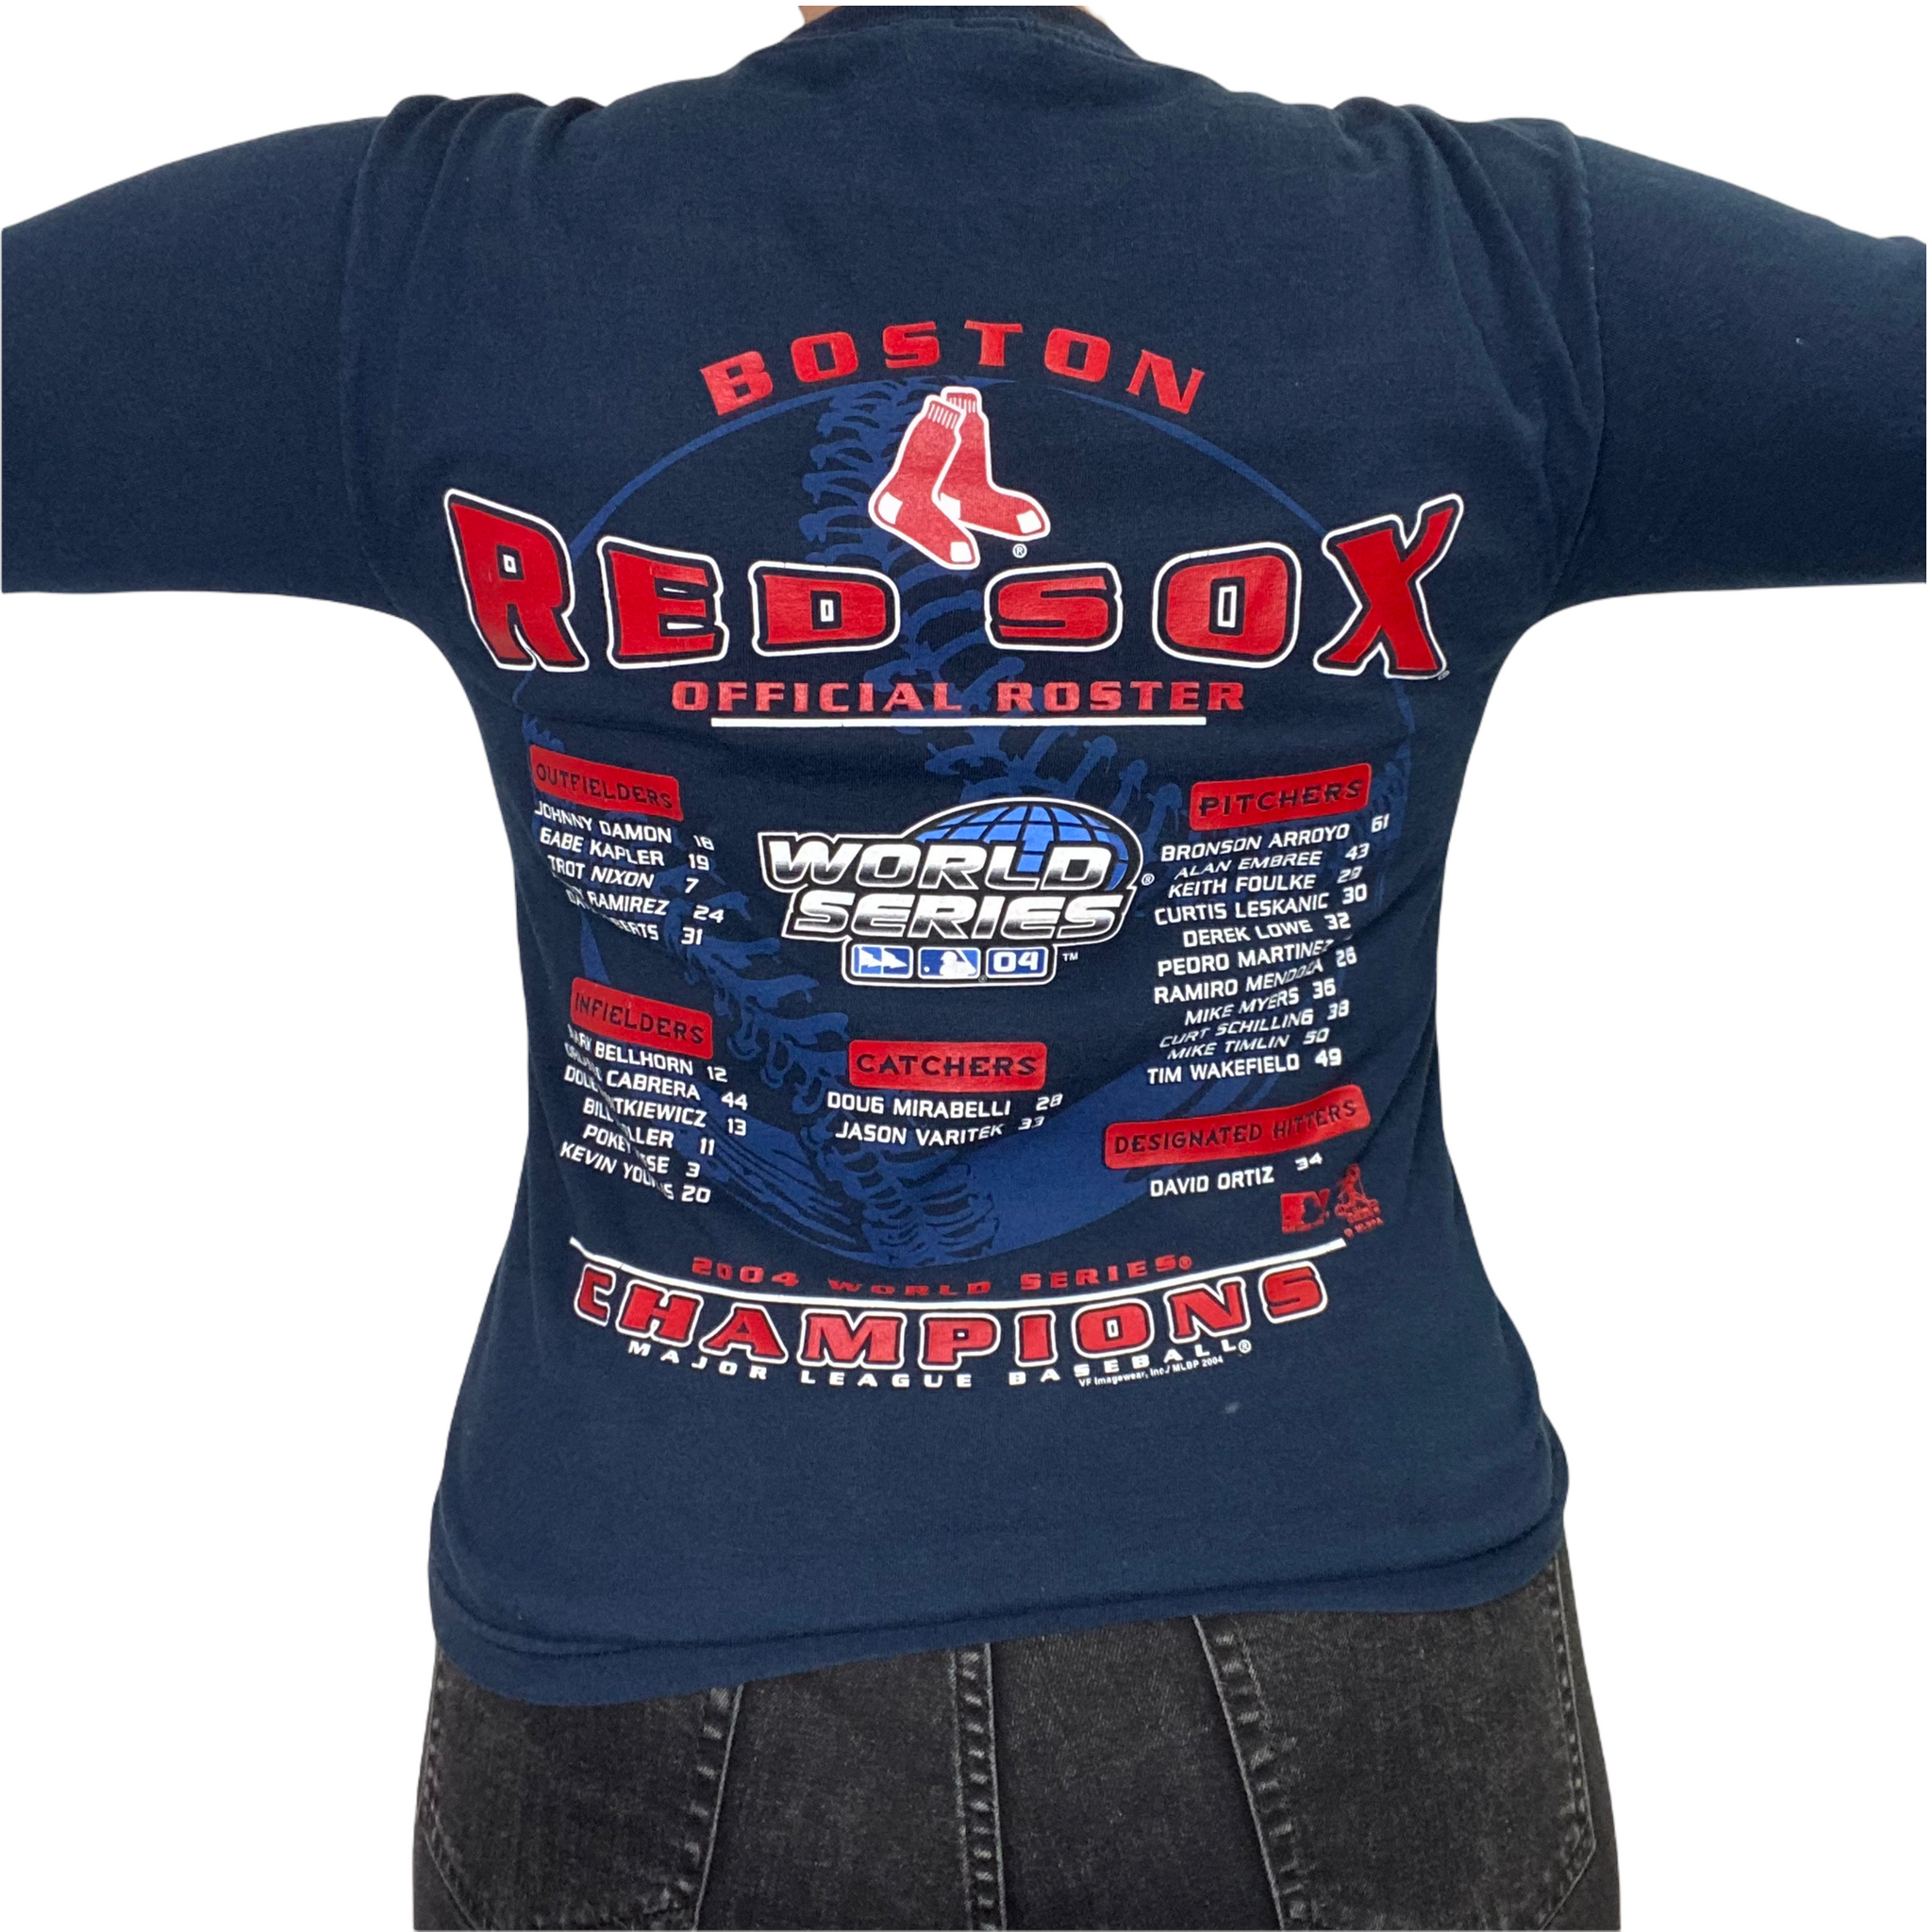 Unisex Boston Red Sox Vintage in Boston Red Sox Team Shop 